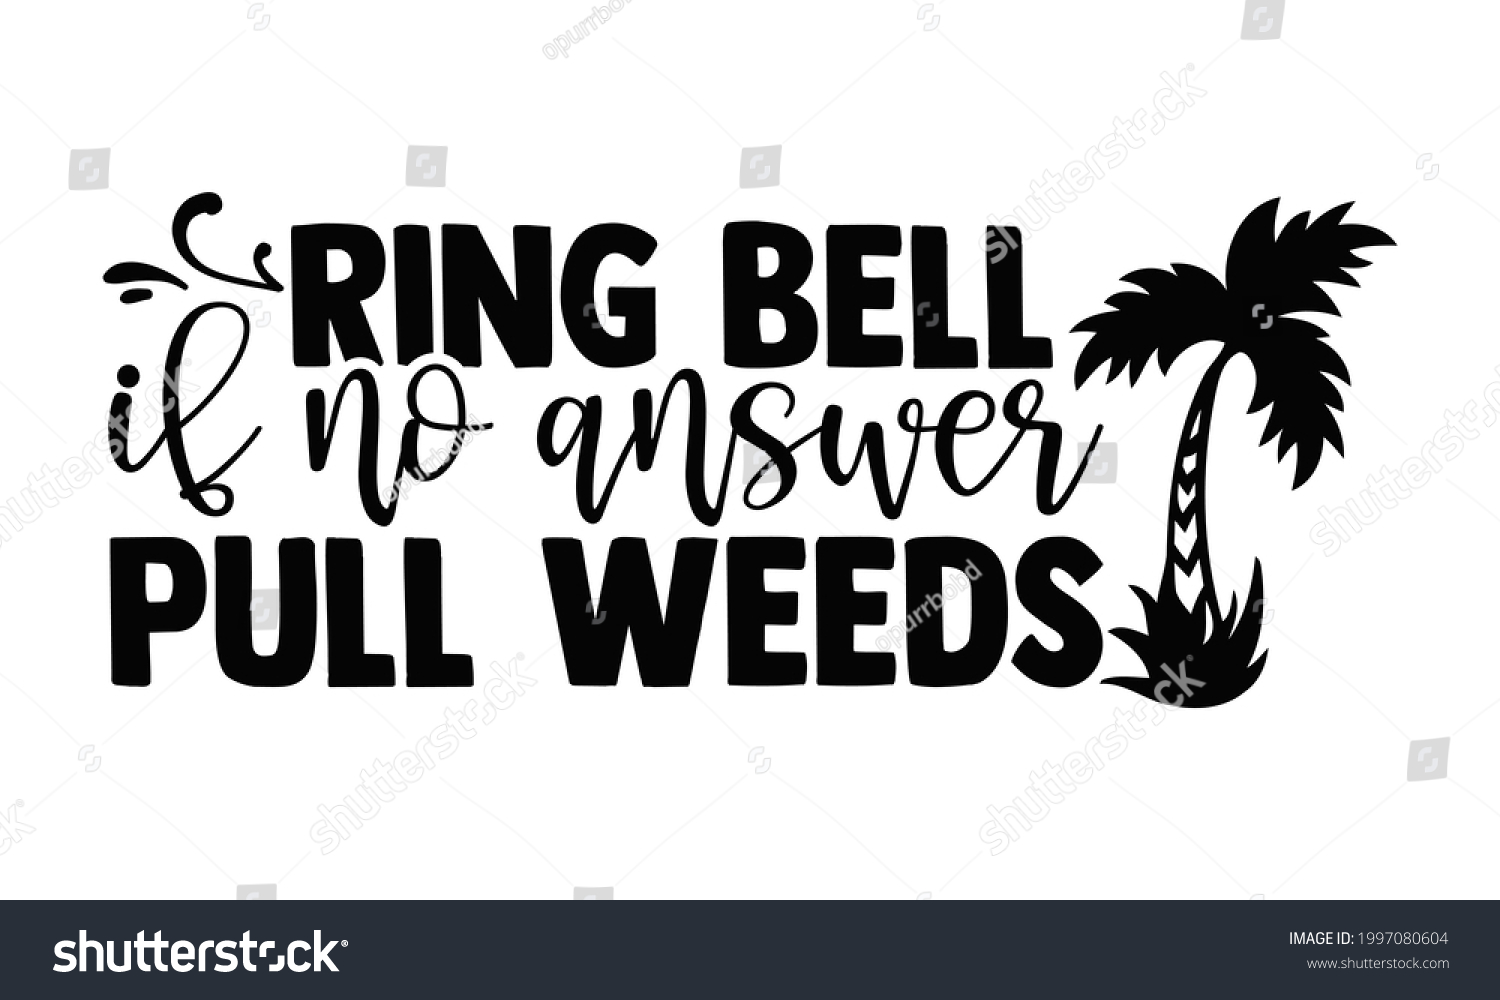 SVG of Ring bell if no answer pull weeds- Gardening t shirts design, Hand drawn lettering phrase, Calligraphy t shirt design, Isolated on white background, svg Files for Cutting Cricut and Silhouette, EPS 10 svg